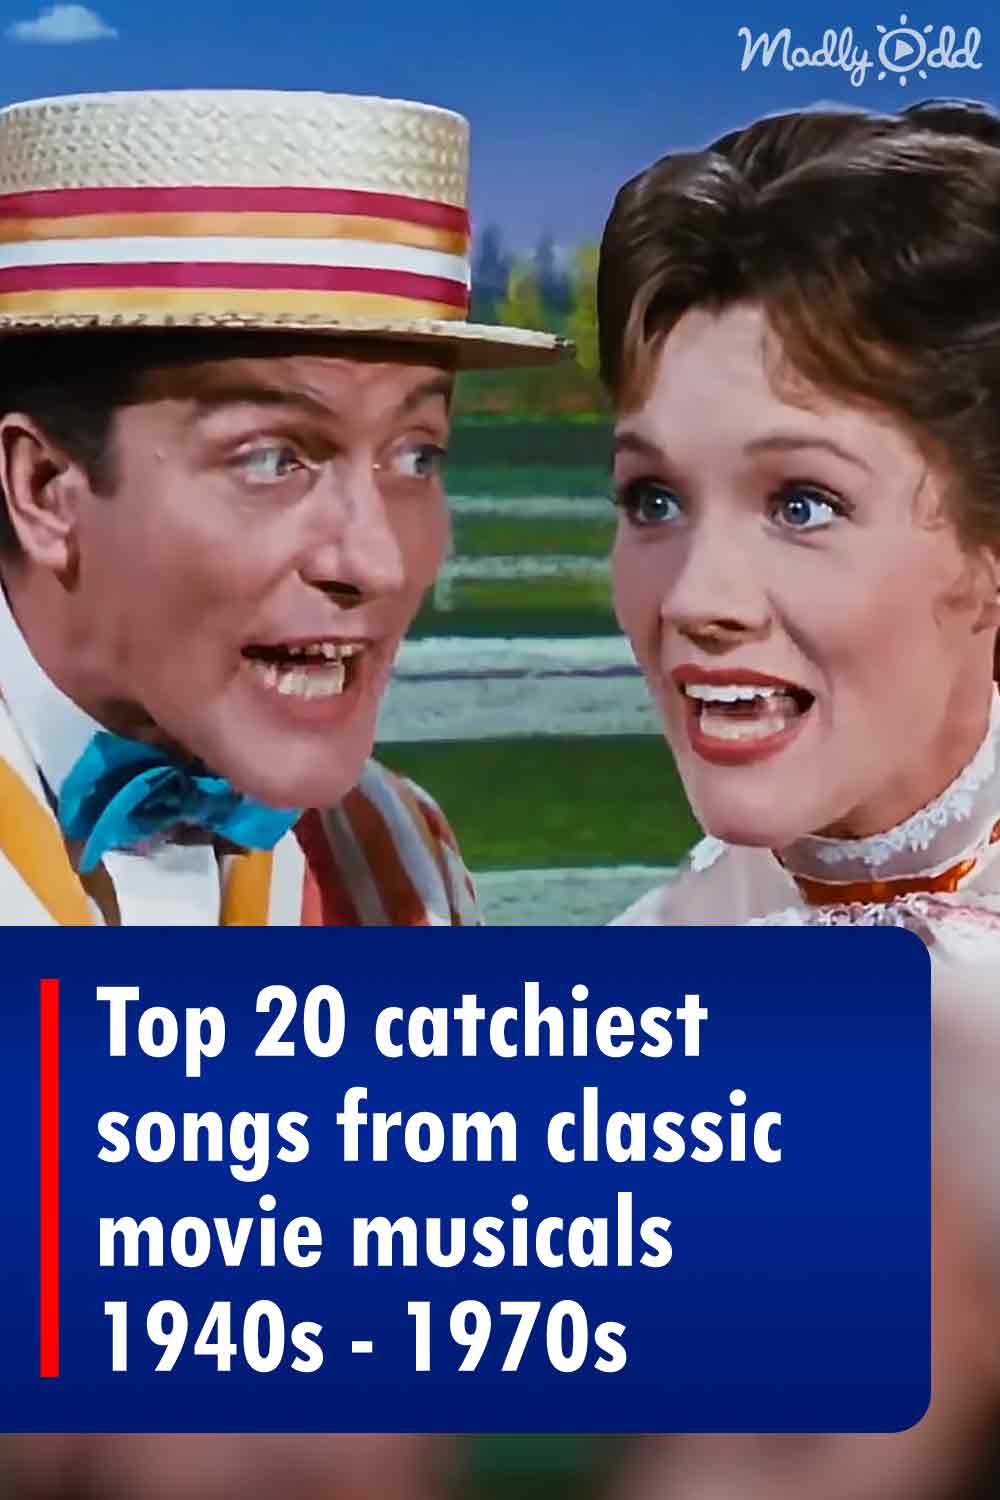 Top 20 catchiest songs from classic movie musicals 1940s - 1970s